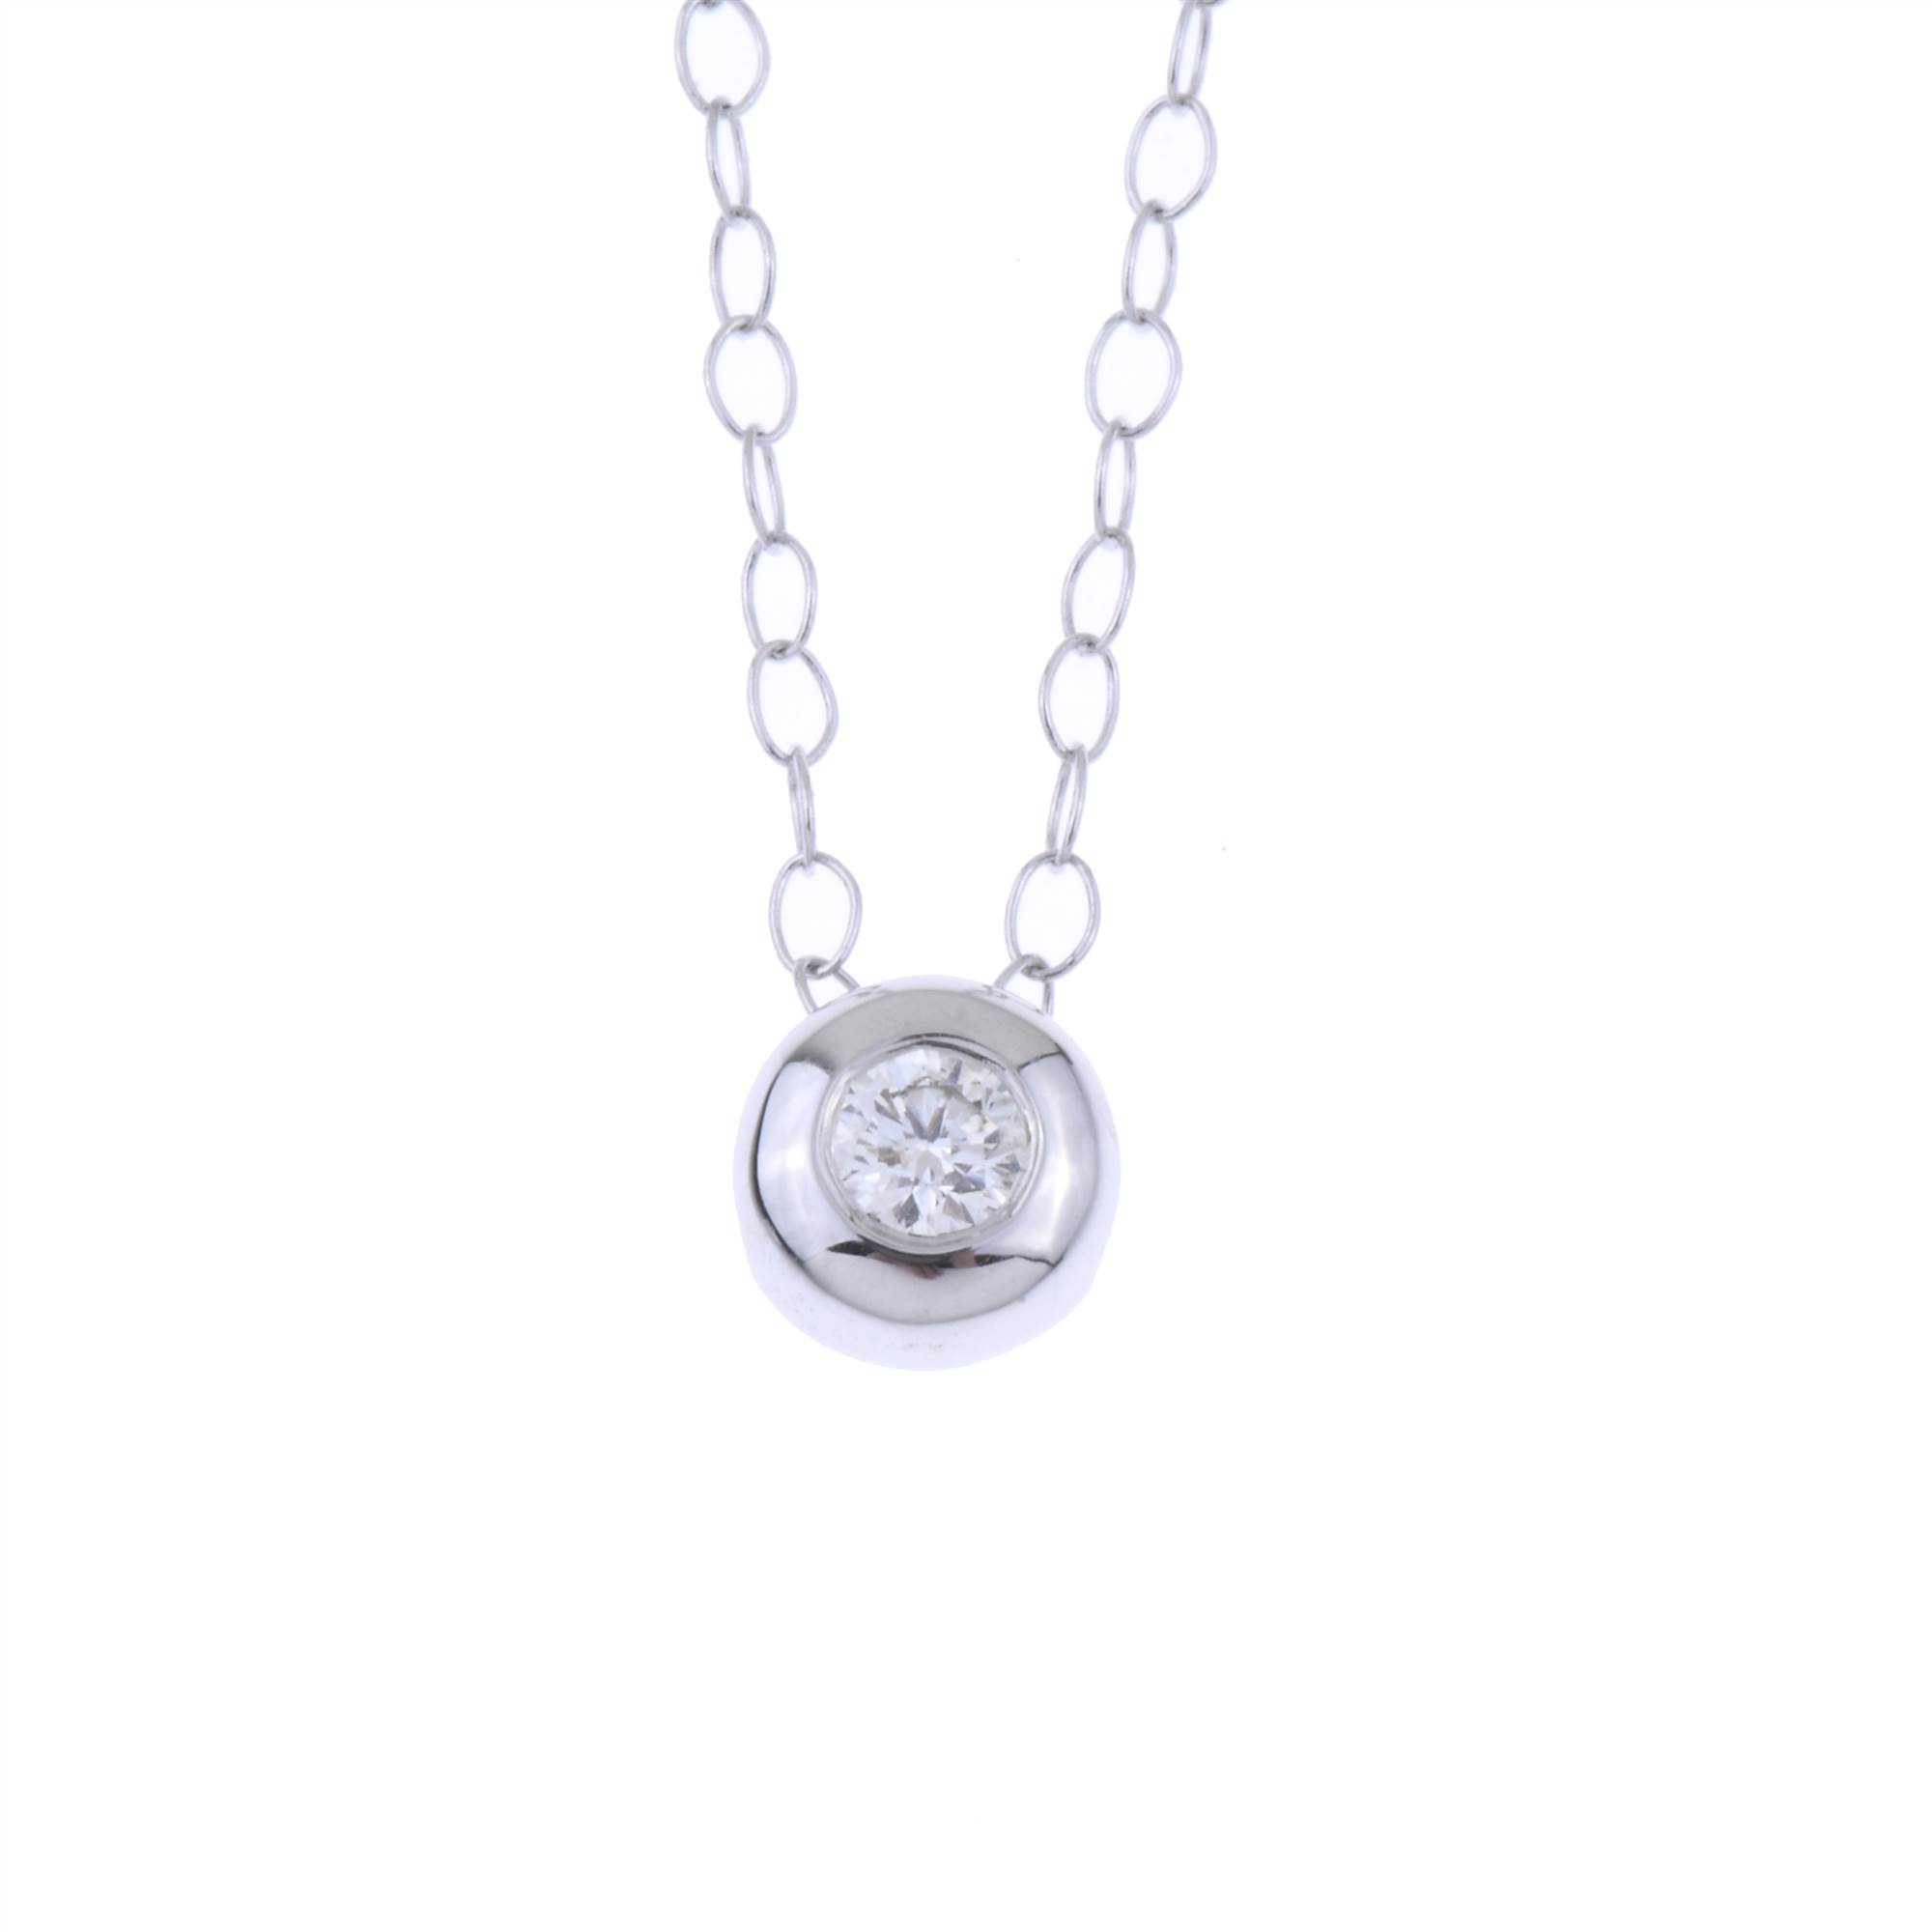 CHAIN WITH ROSETTE PENDANT IN WHITE GOLD AND DIAMOND.